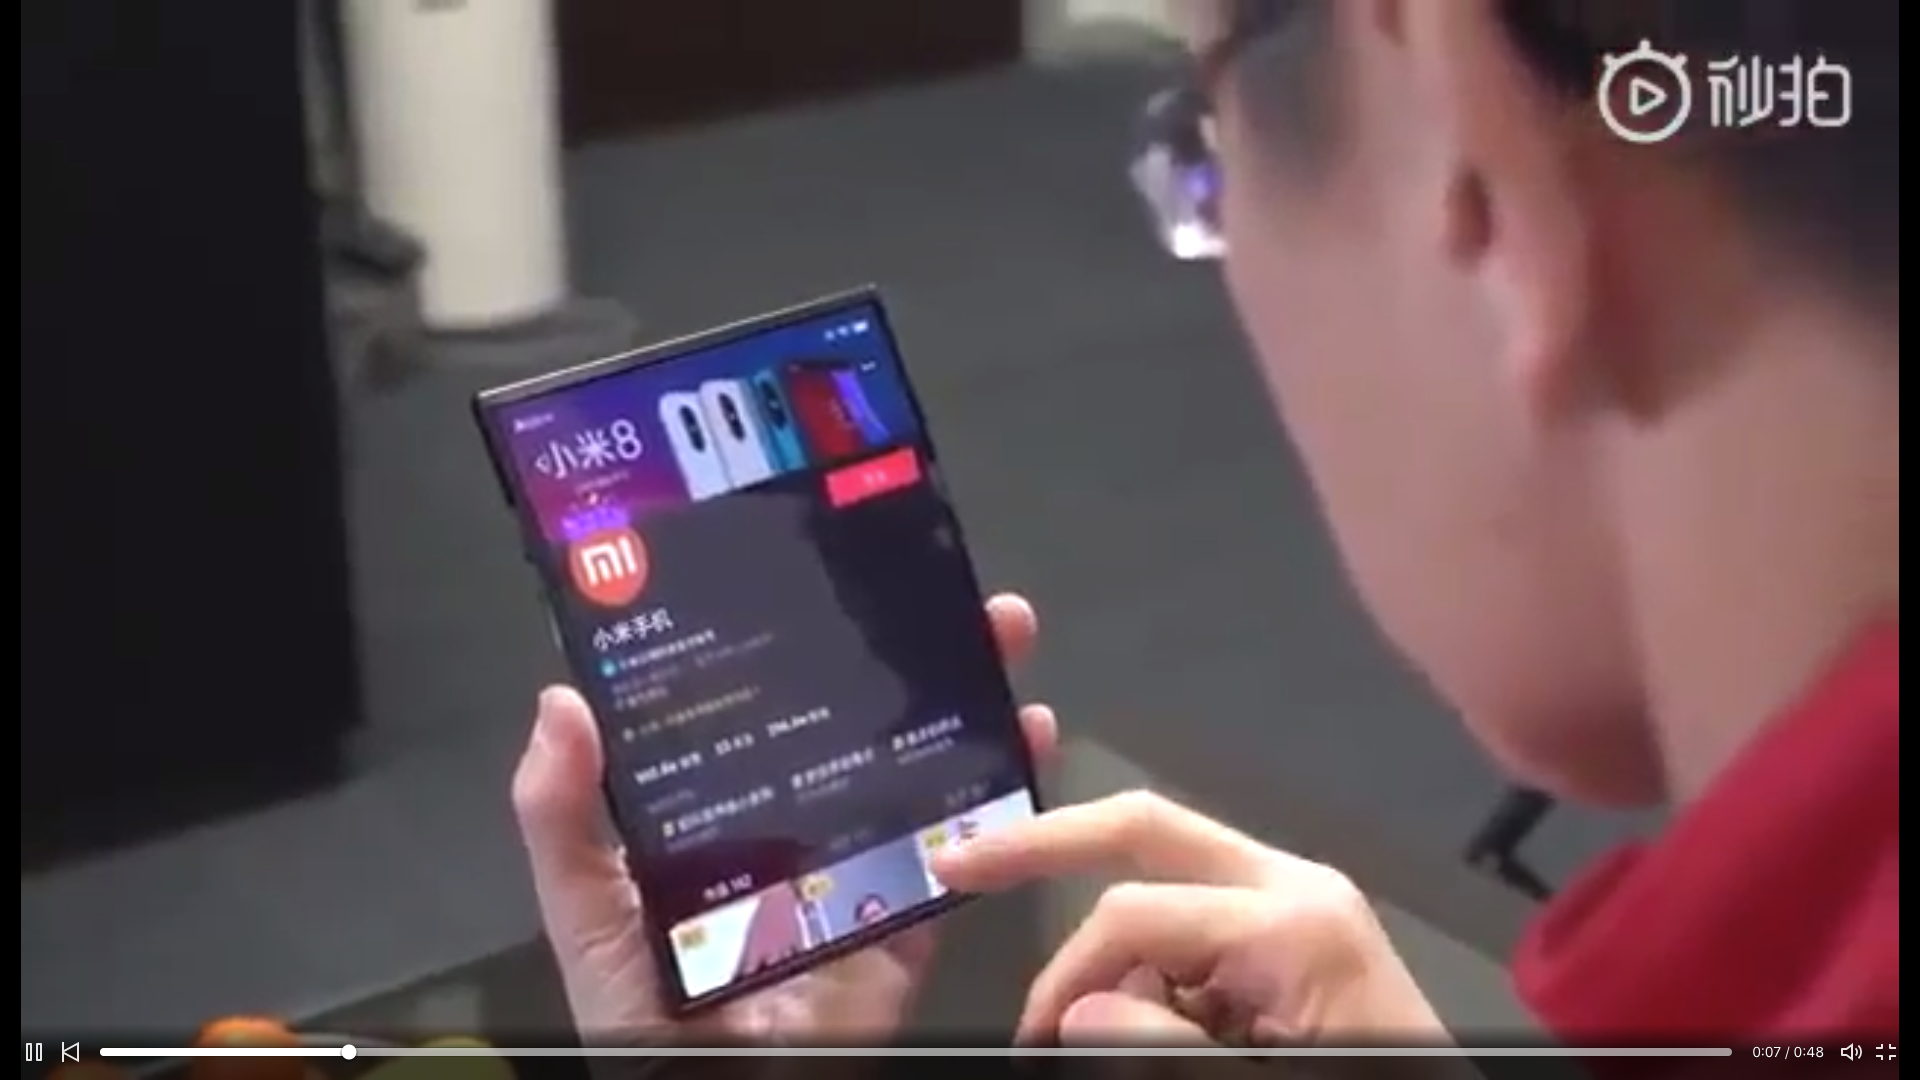 Foldable smartphone by xiaomi